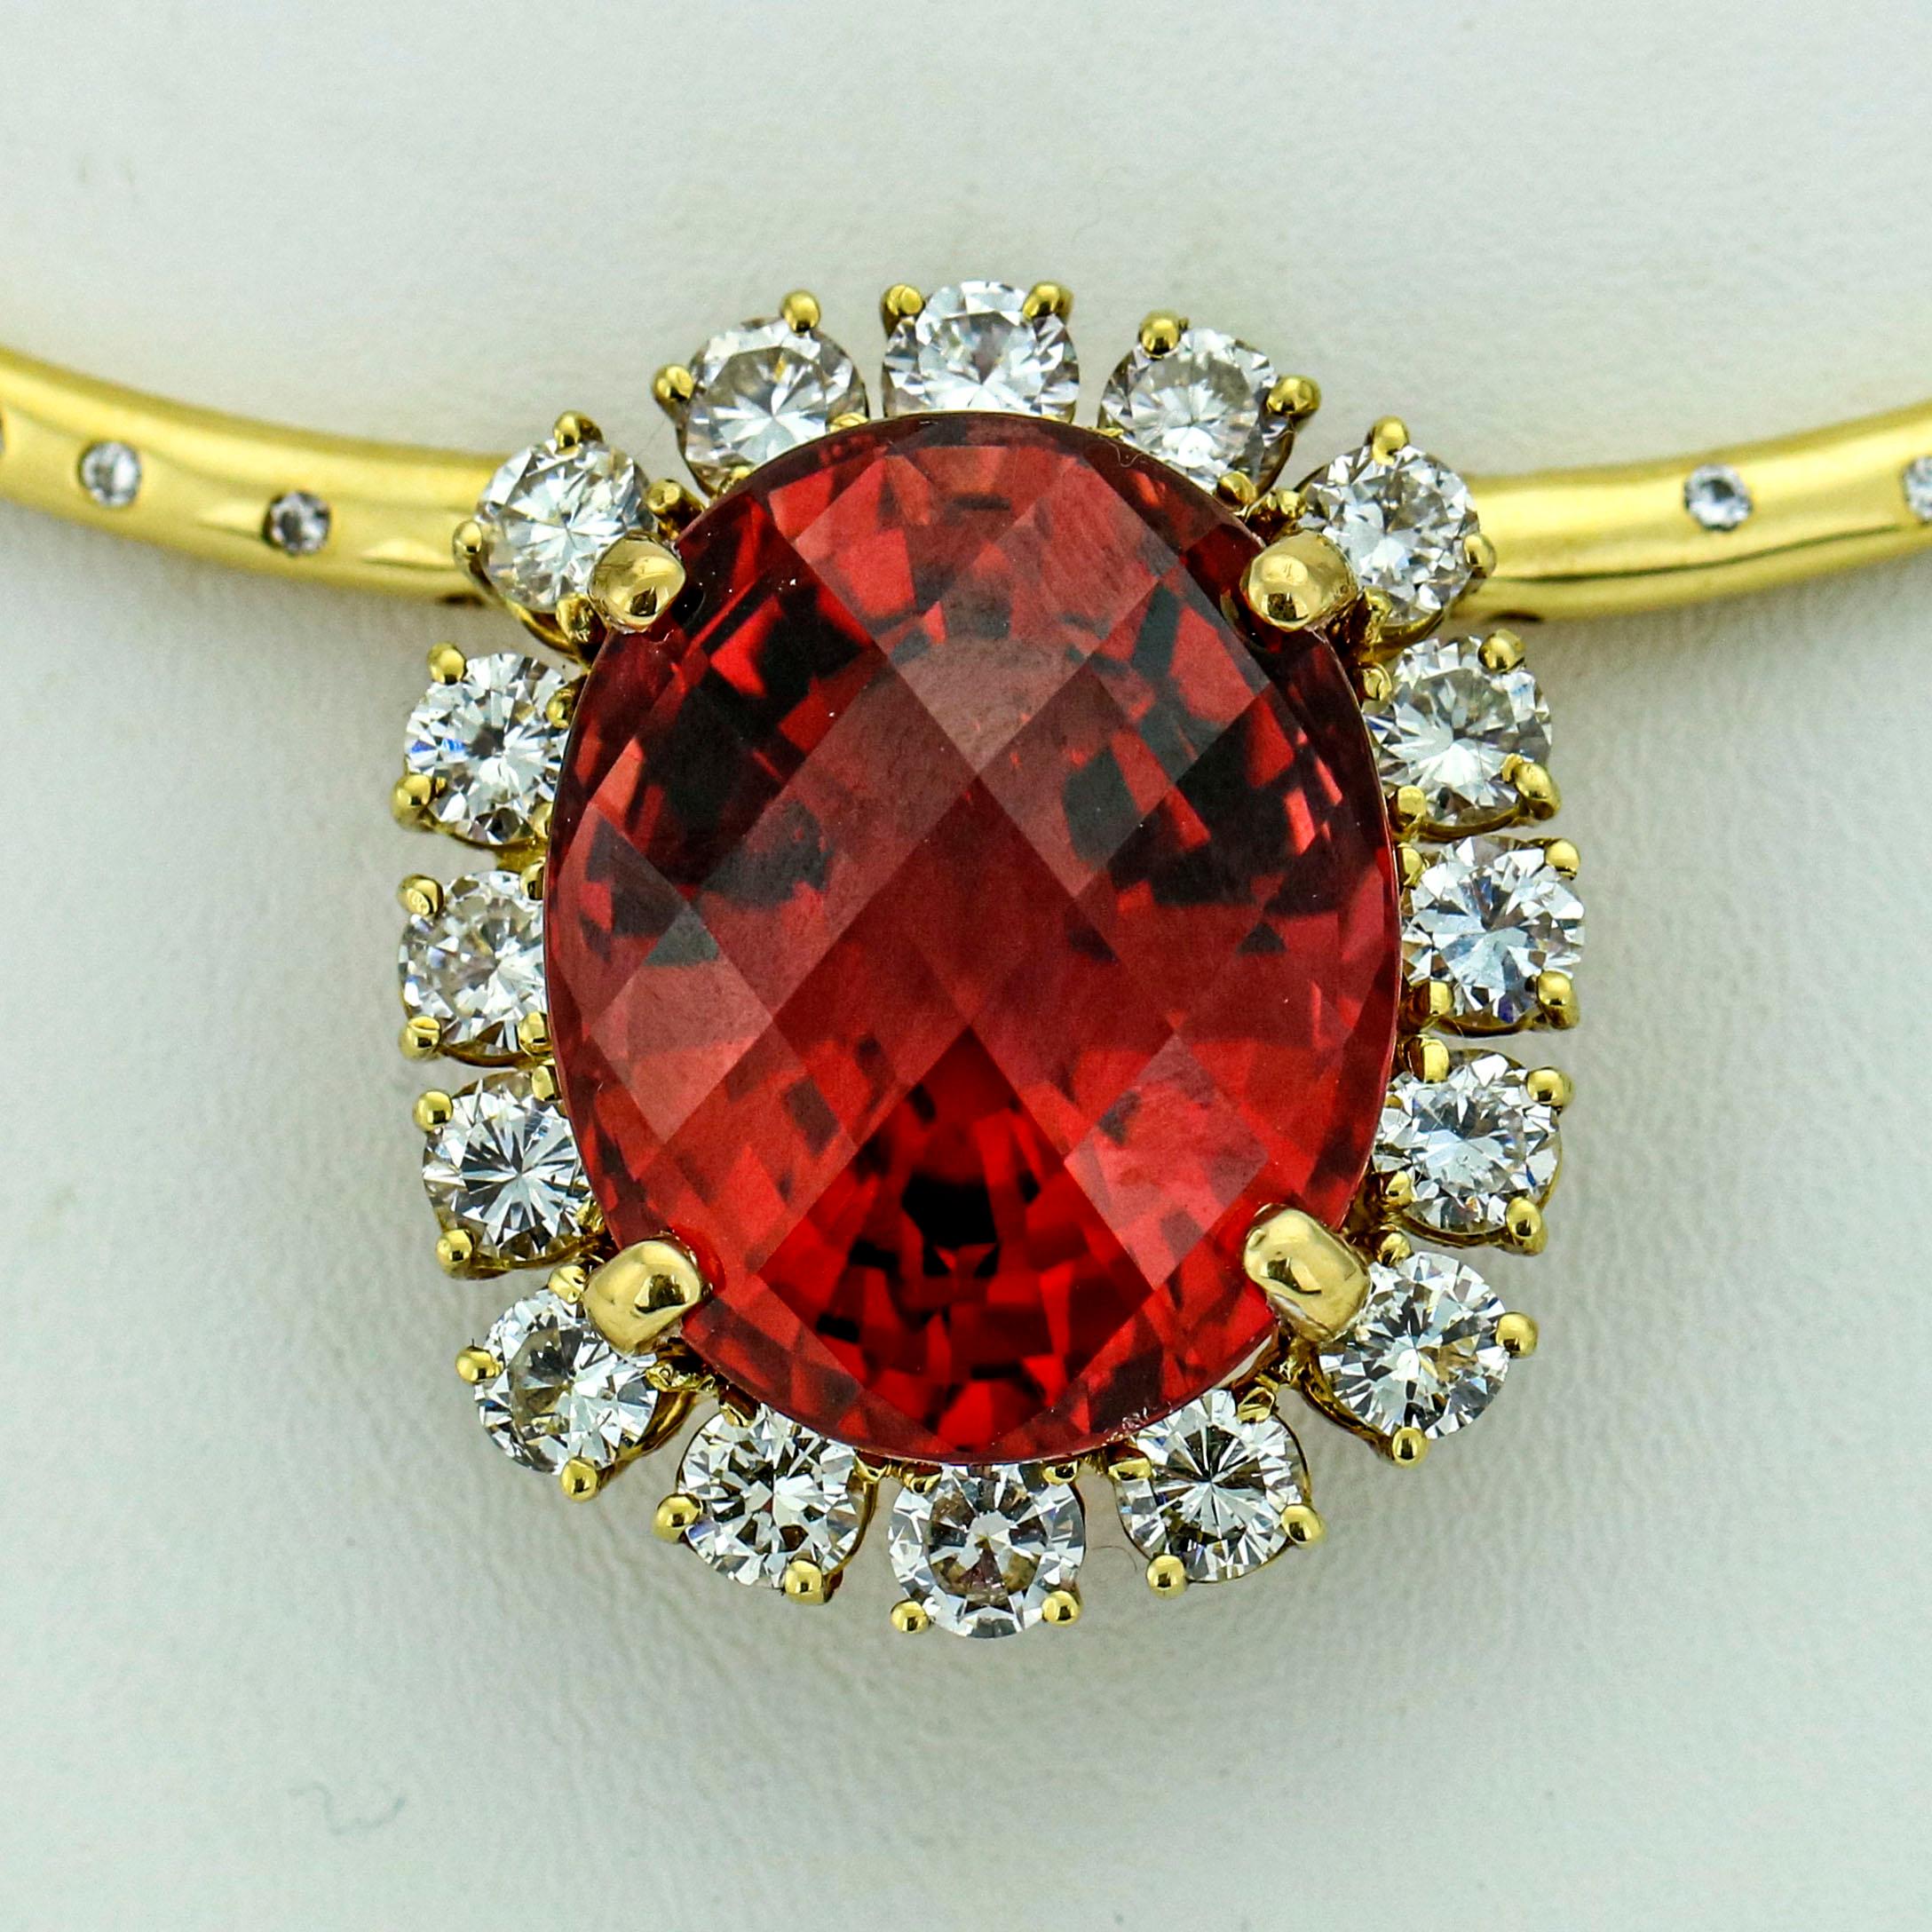 Rubellite Tourmaline and diamond pendant necklace in 18-karat yellow gold. The necklace contains 23 round brilliant cut natural diamonds, and a prong set oval mixed cut tourmaline. It comes with appraisal. The appraisal replacement value